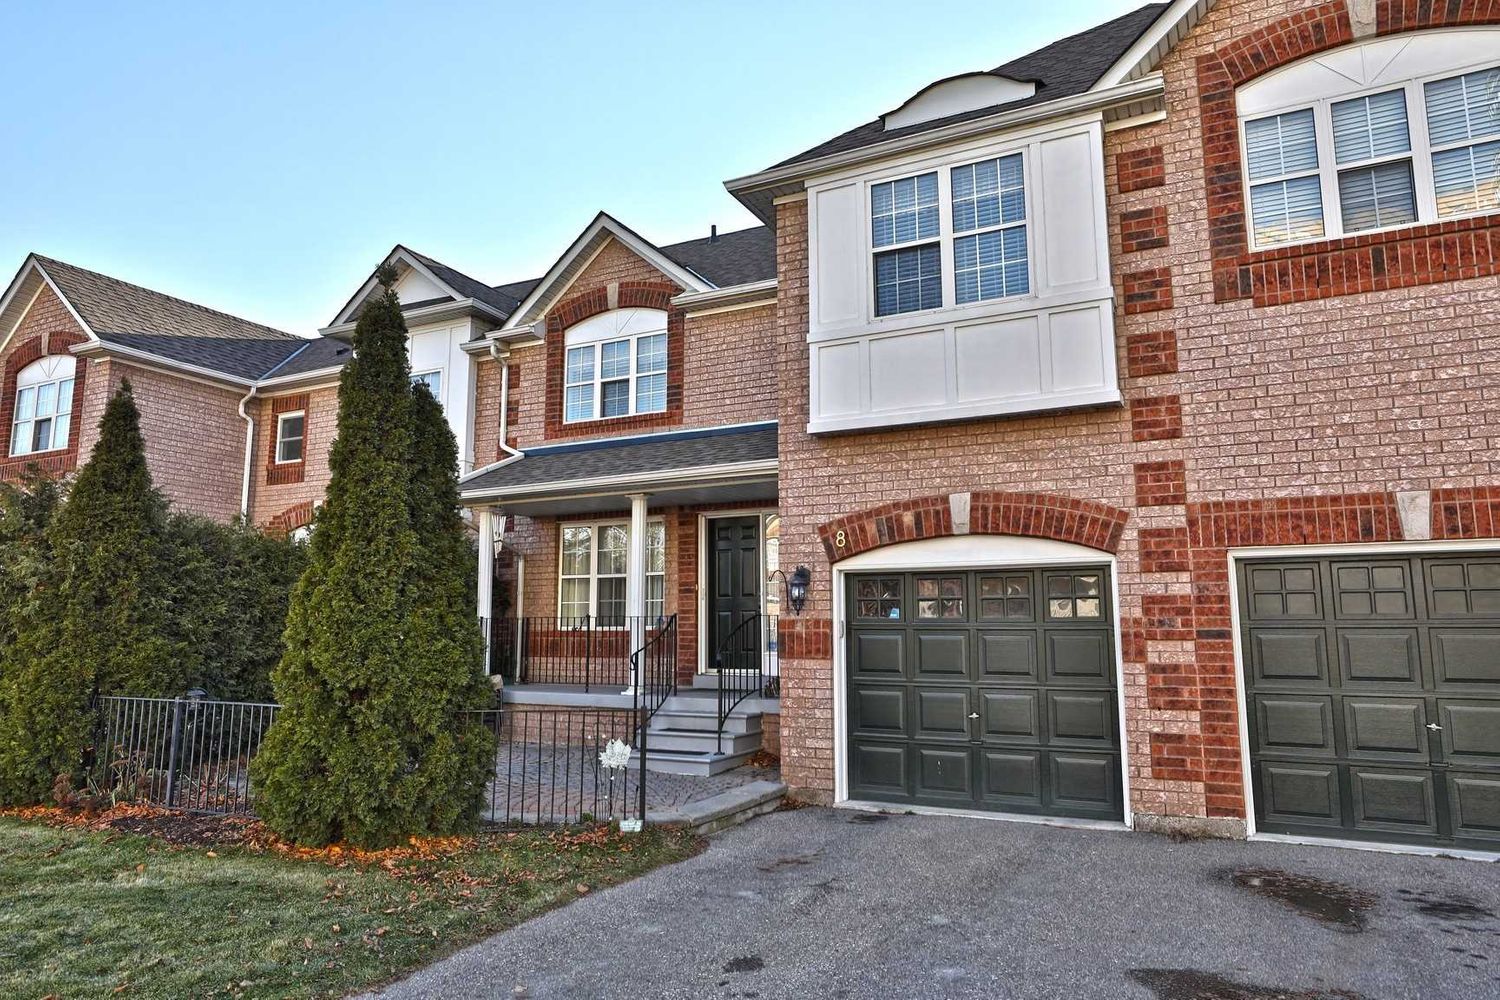 199 Hillcrest Avenue. 199 Hillcrest Avenue Townhomes is located in  Mississauga, Toronto - image #1 of 2